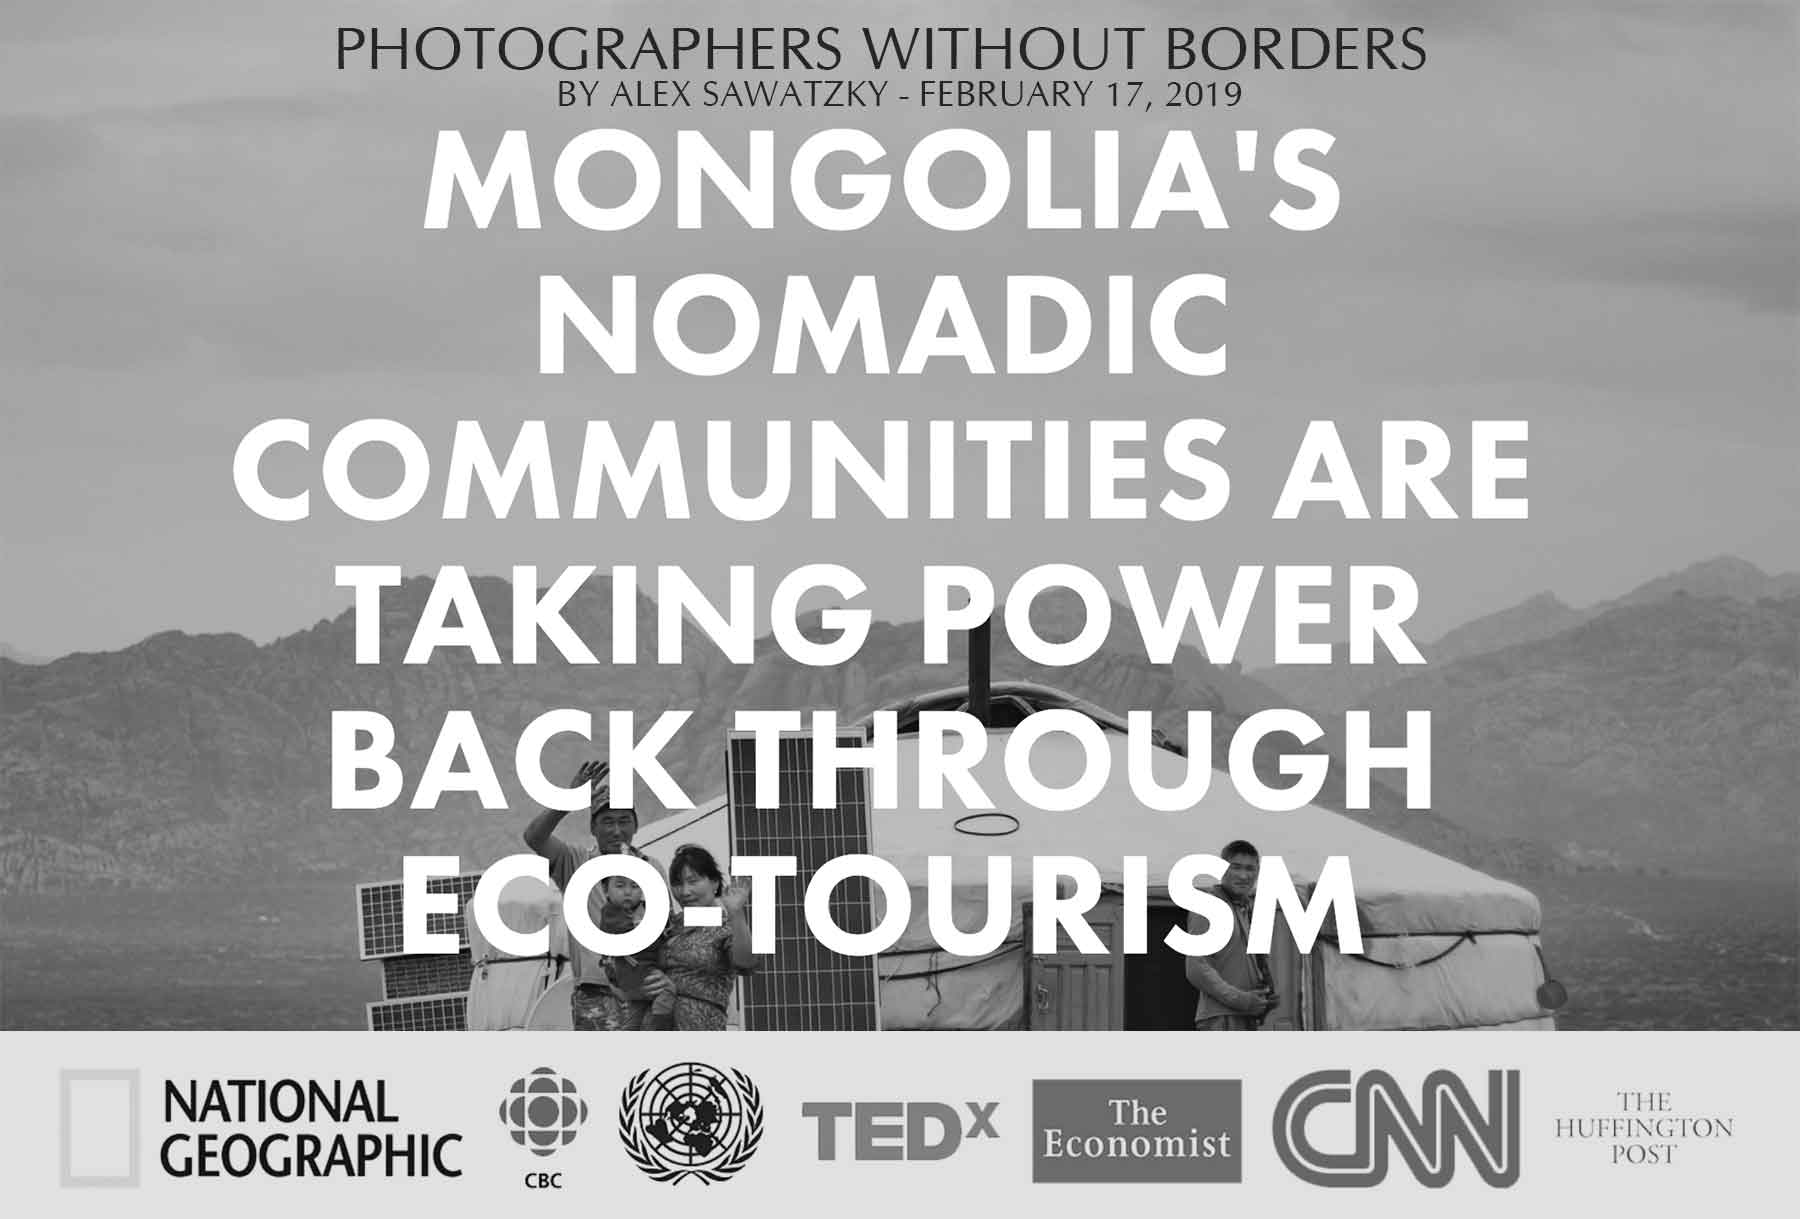 GER to GER, Zanjan Fromer and Photographer Without Borders